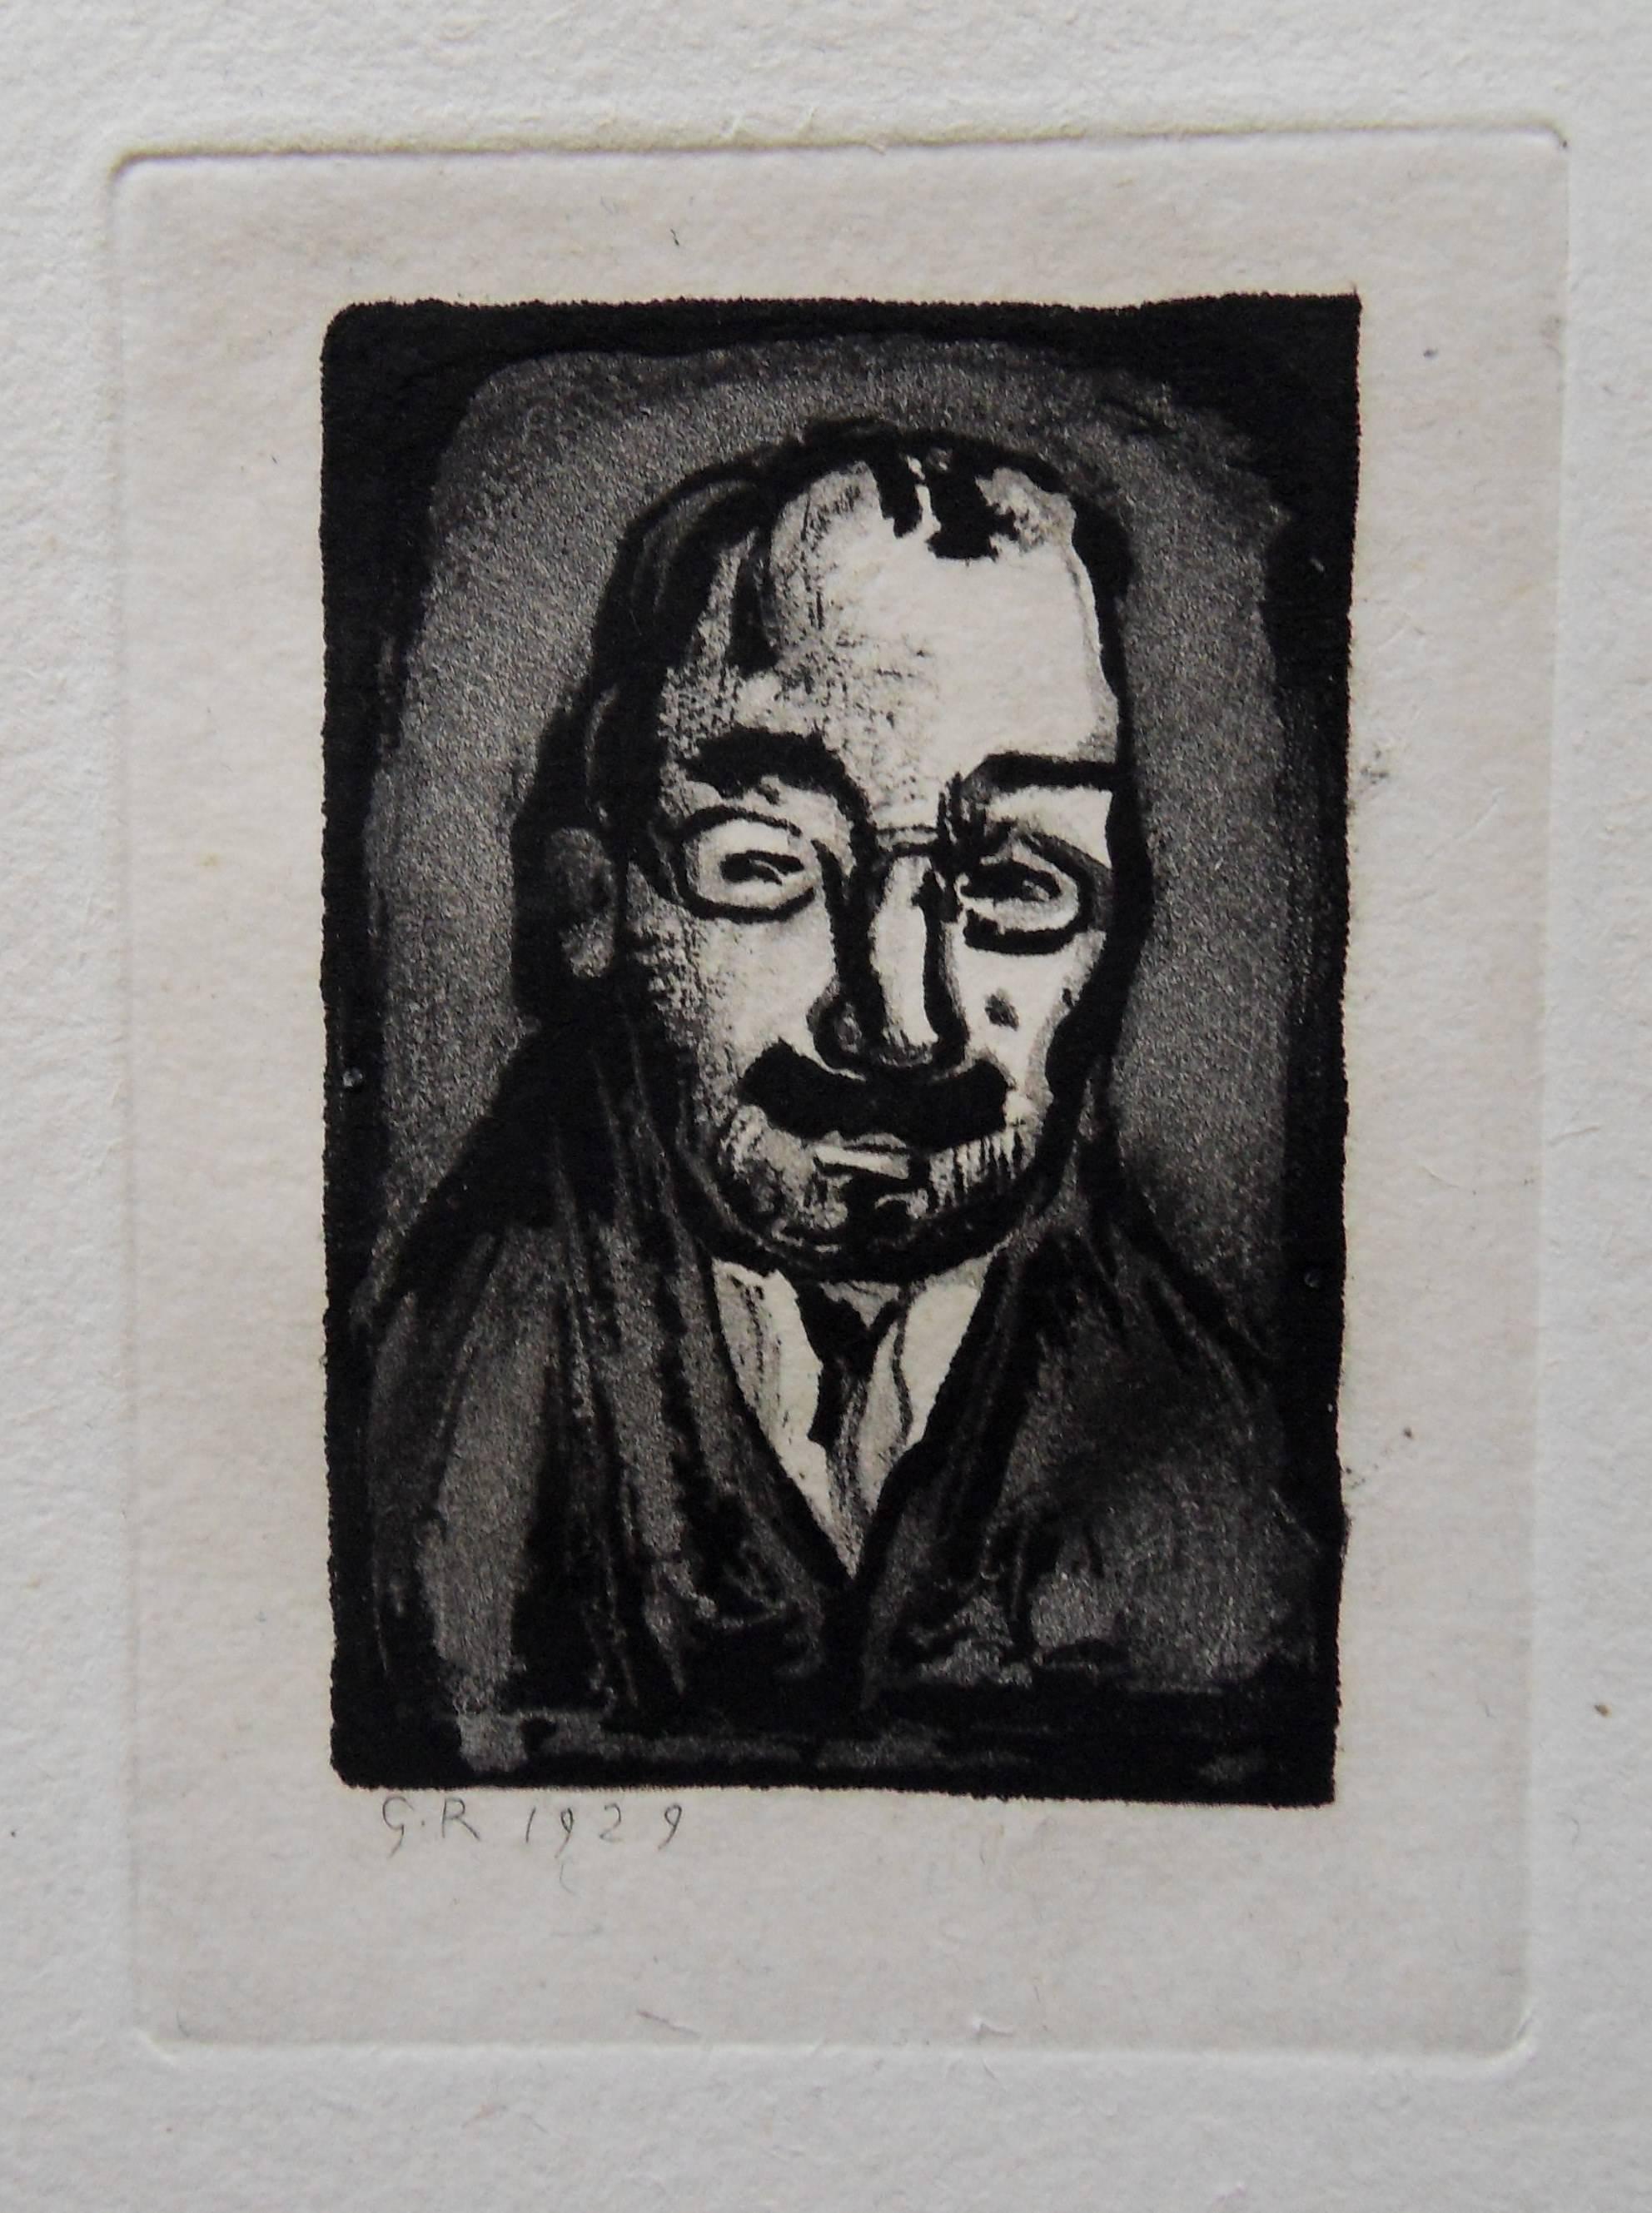 Georges Rouault Figurative Print - Man with Glasses - Original etching - 1929